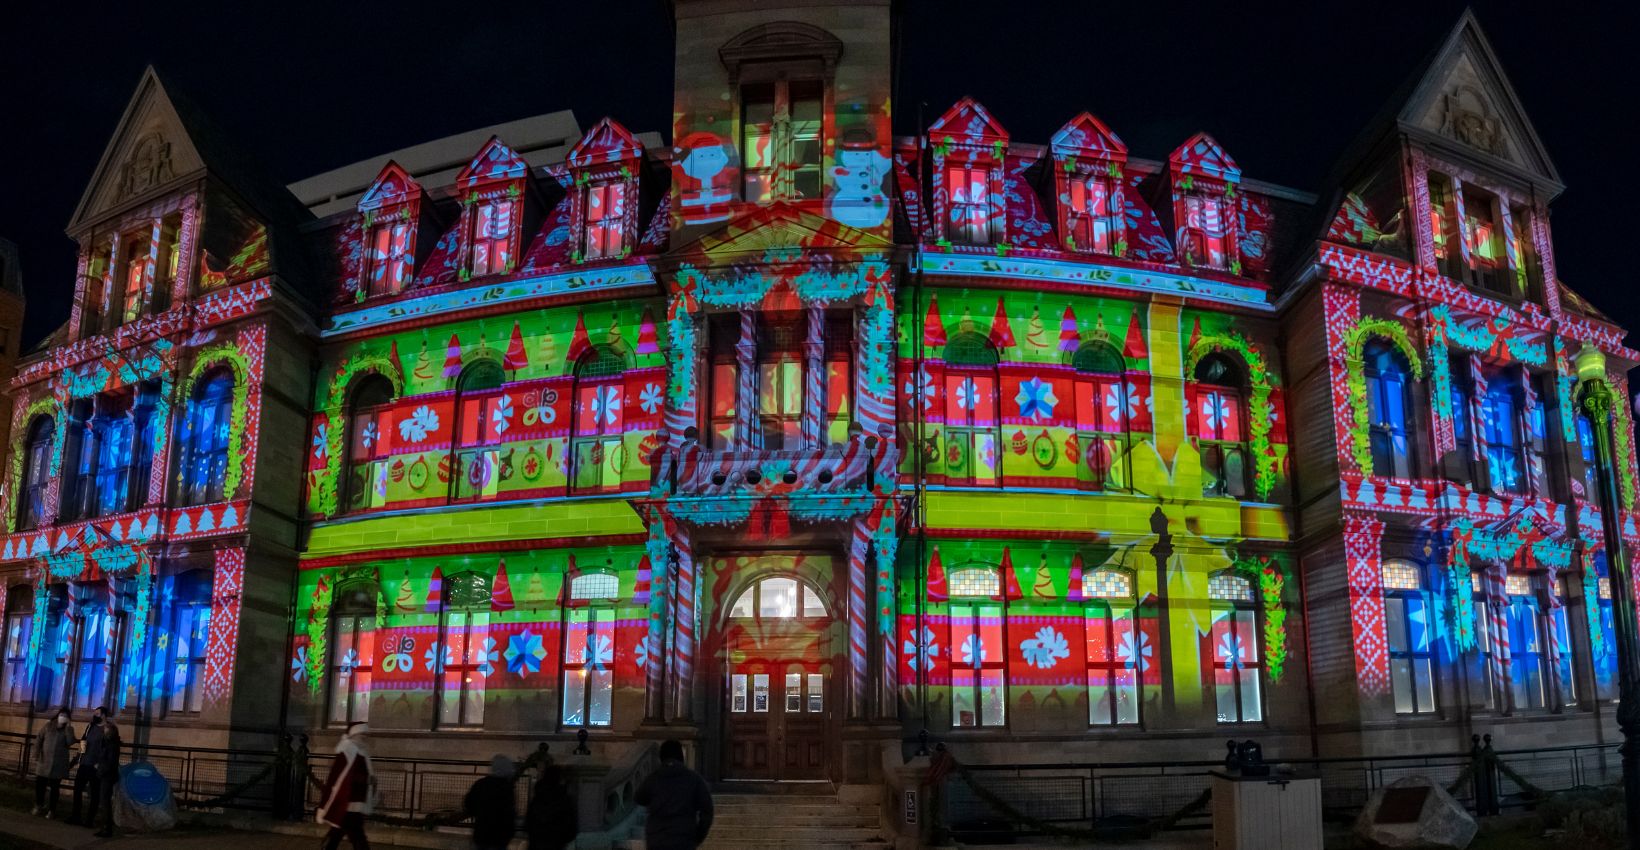 2021 City Hall Holiday Projection Show present scene panorama image